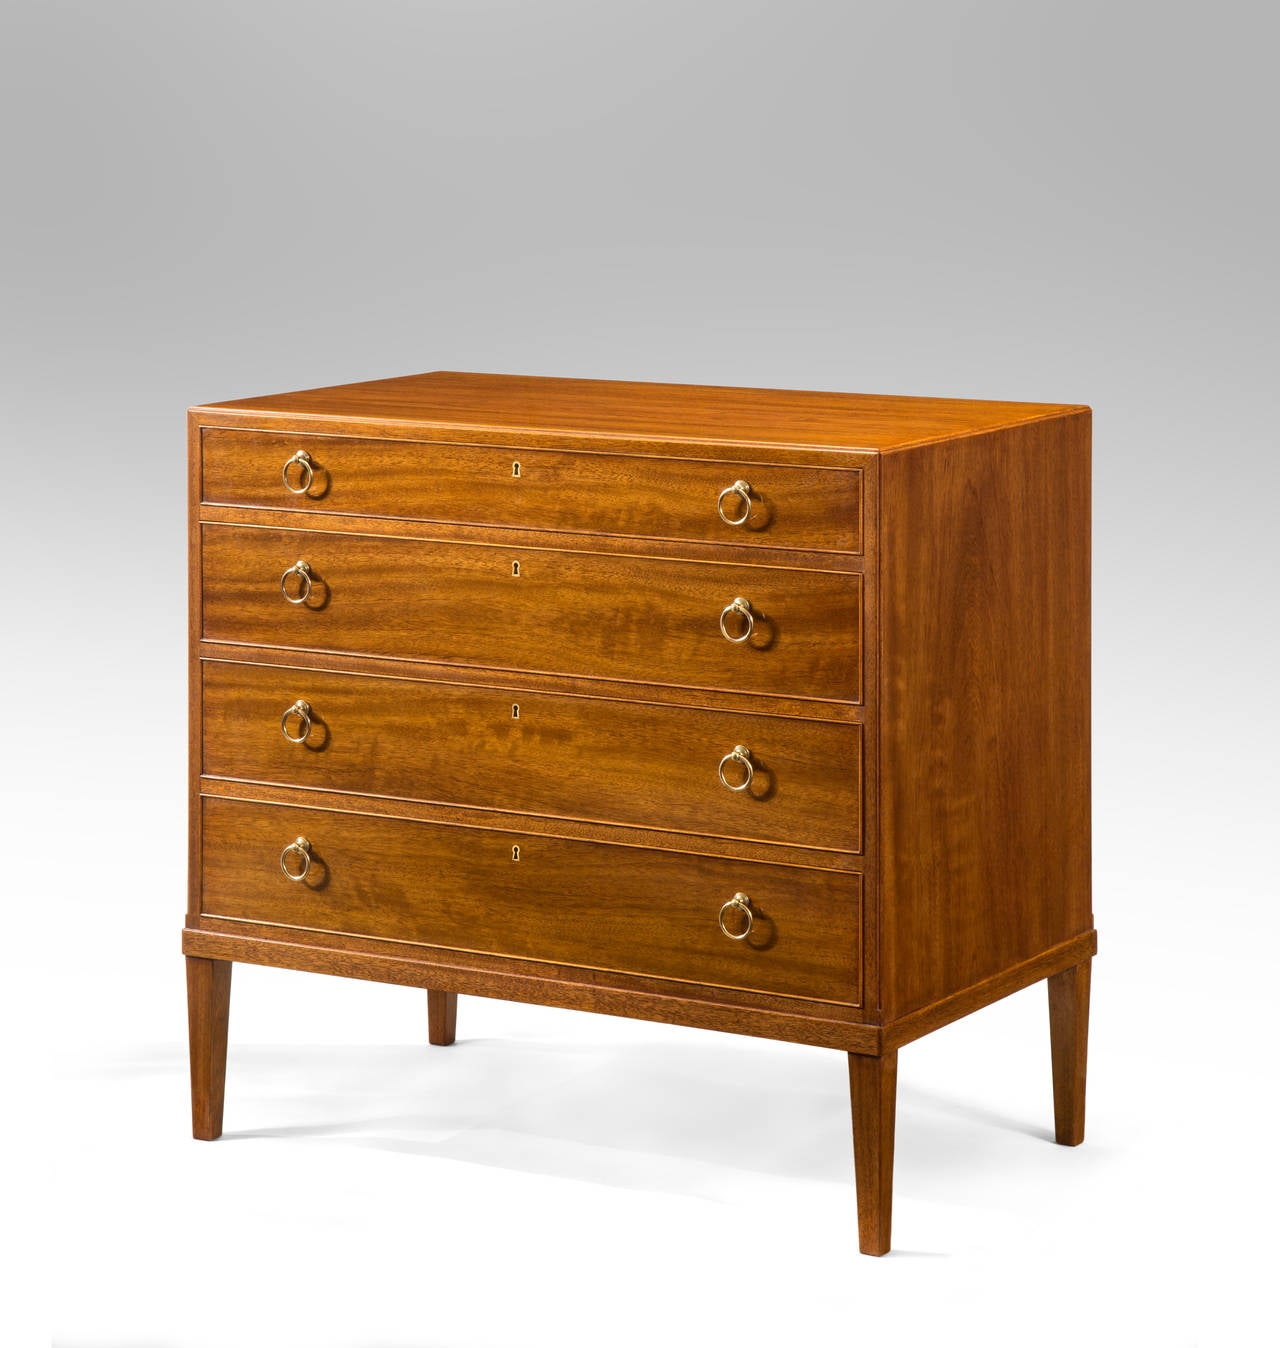 The rectangular top above 4 graduated drawers with brass ring pulls, raised on square tapering legs.